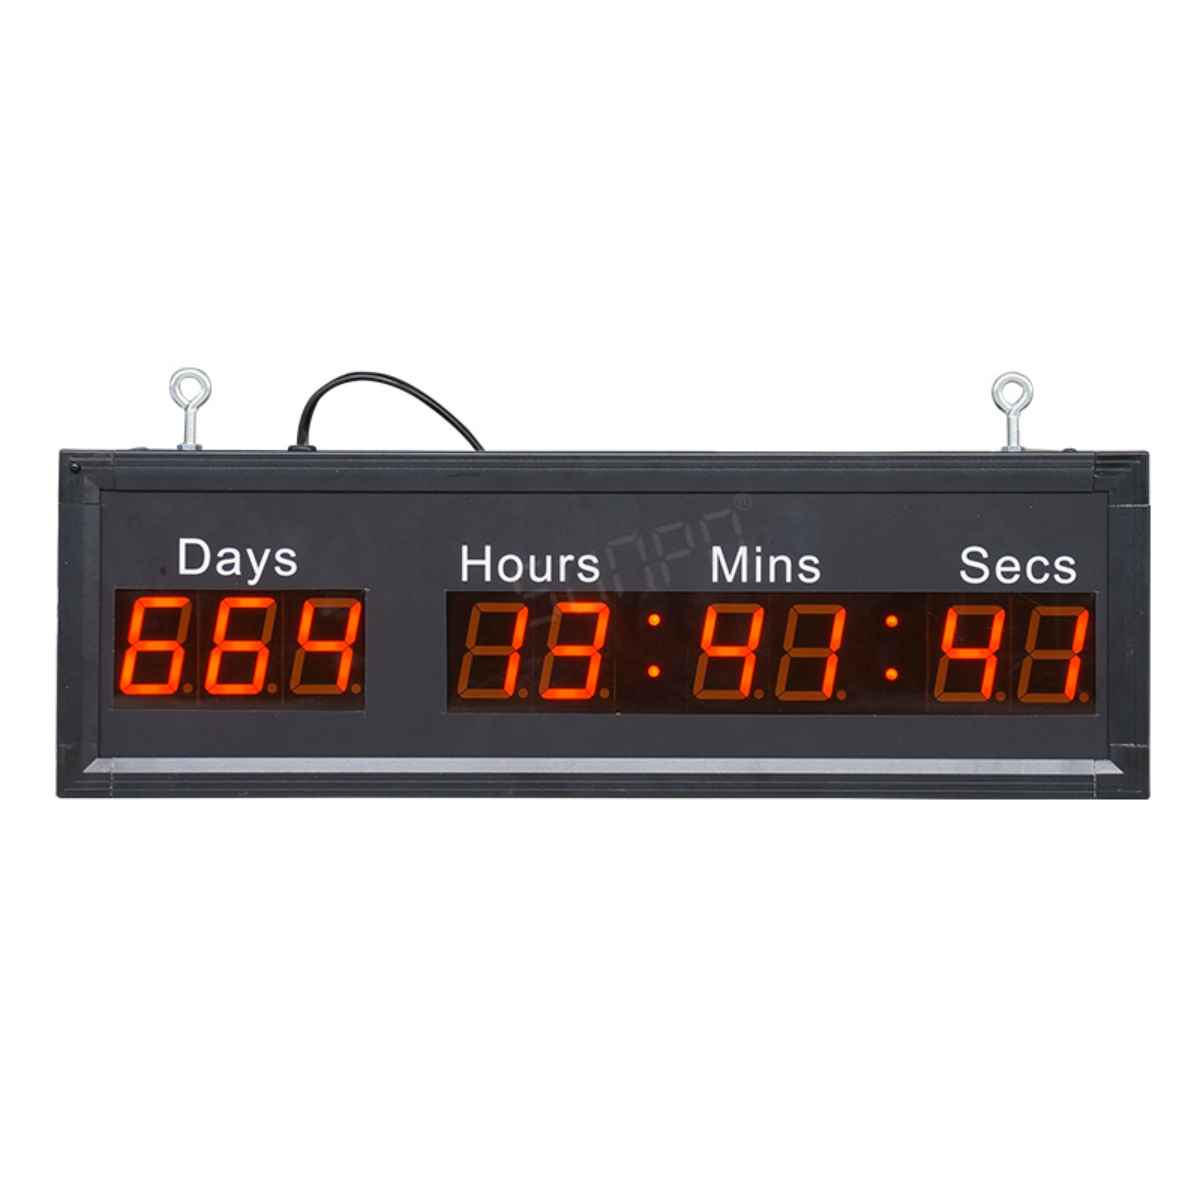 31. Countdown to Love: Personalized LDR Countdown Clock